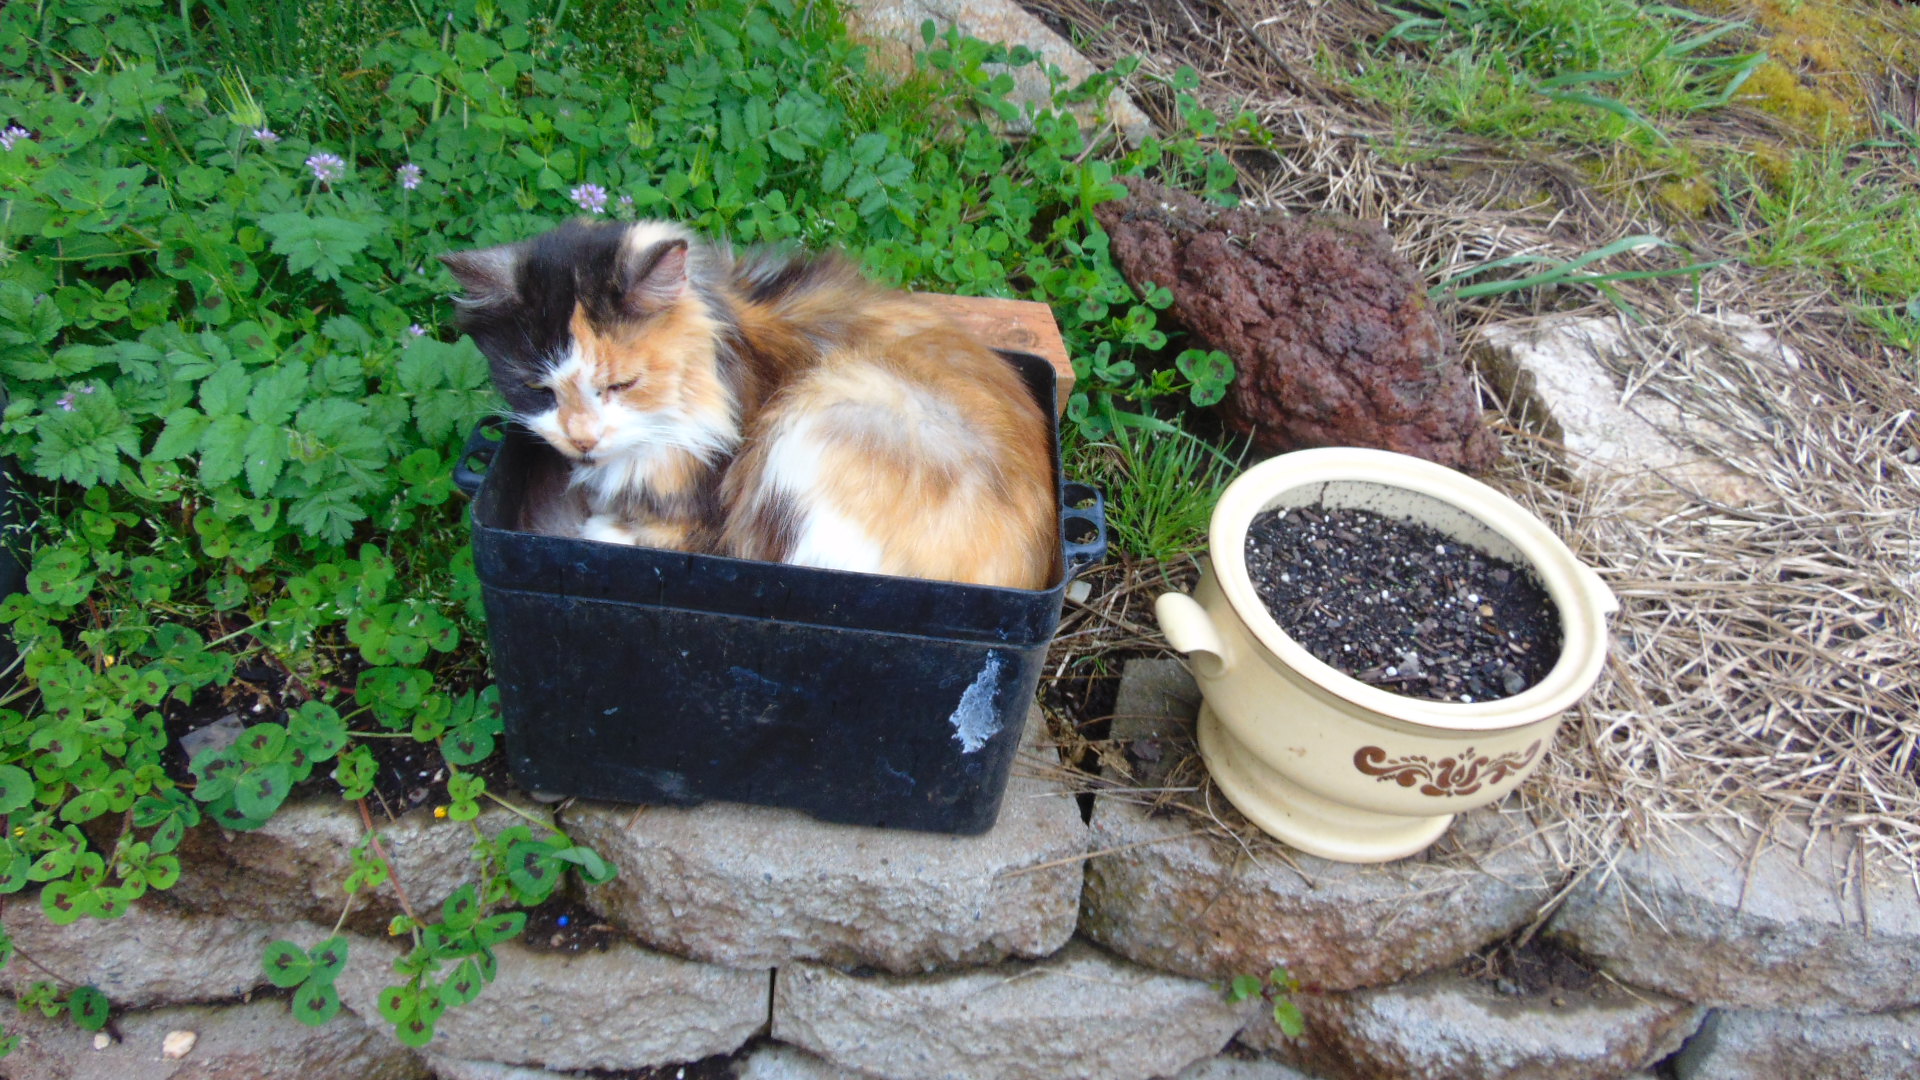 Something is growing in the flower pot.